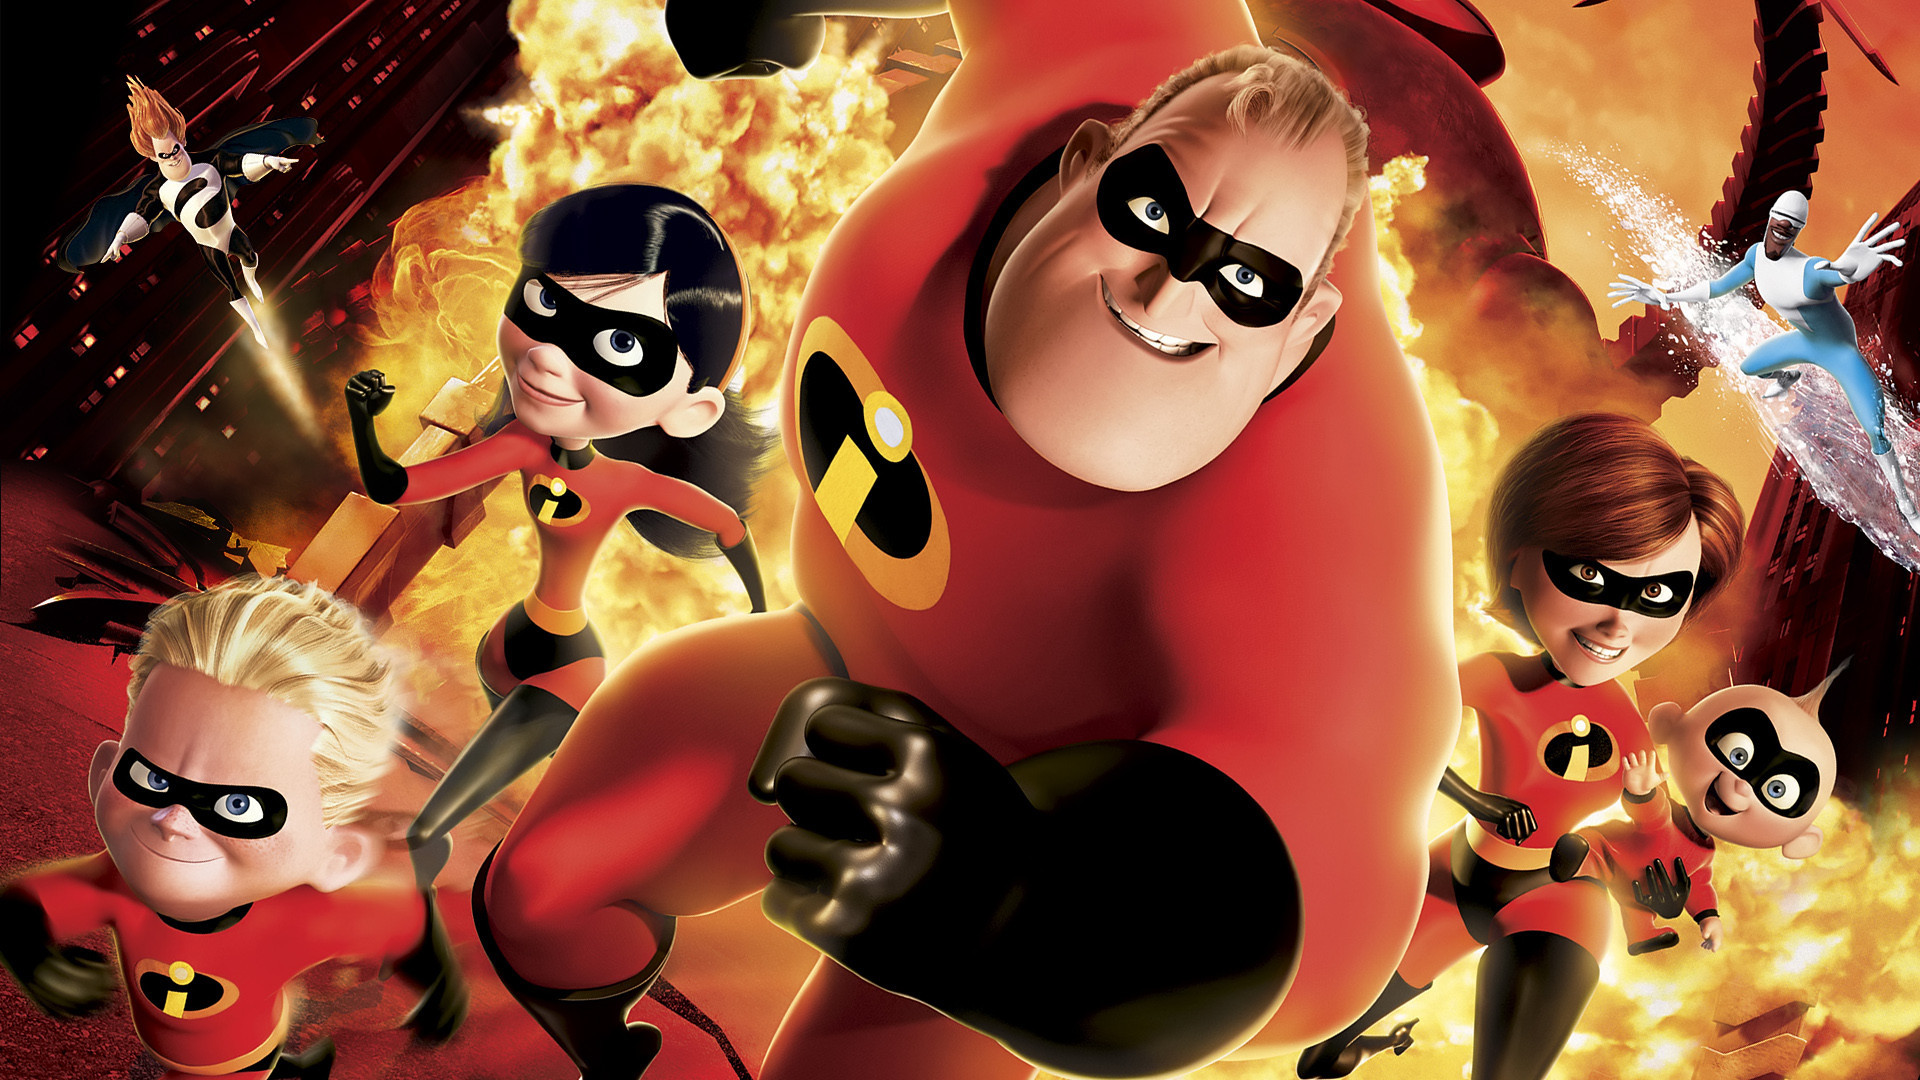 1080p Syndrome (The Incredibles) Hd Images